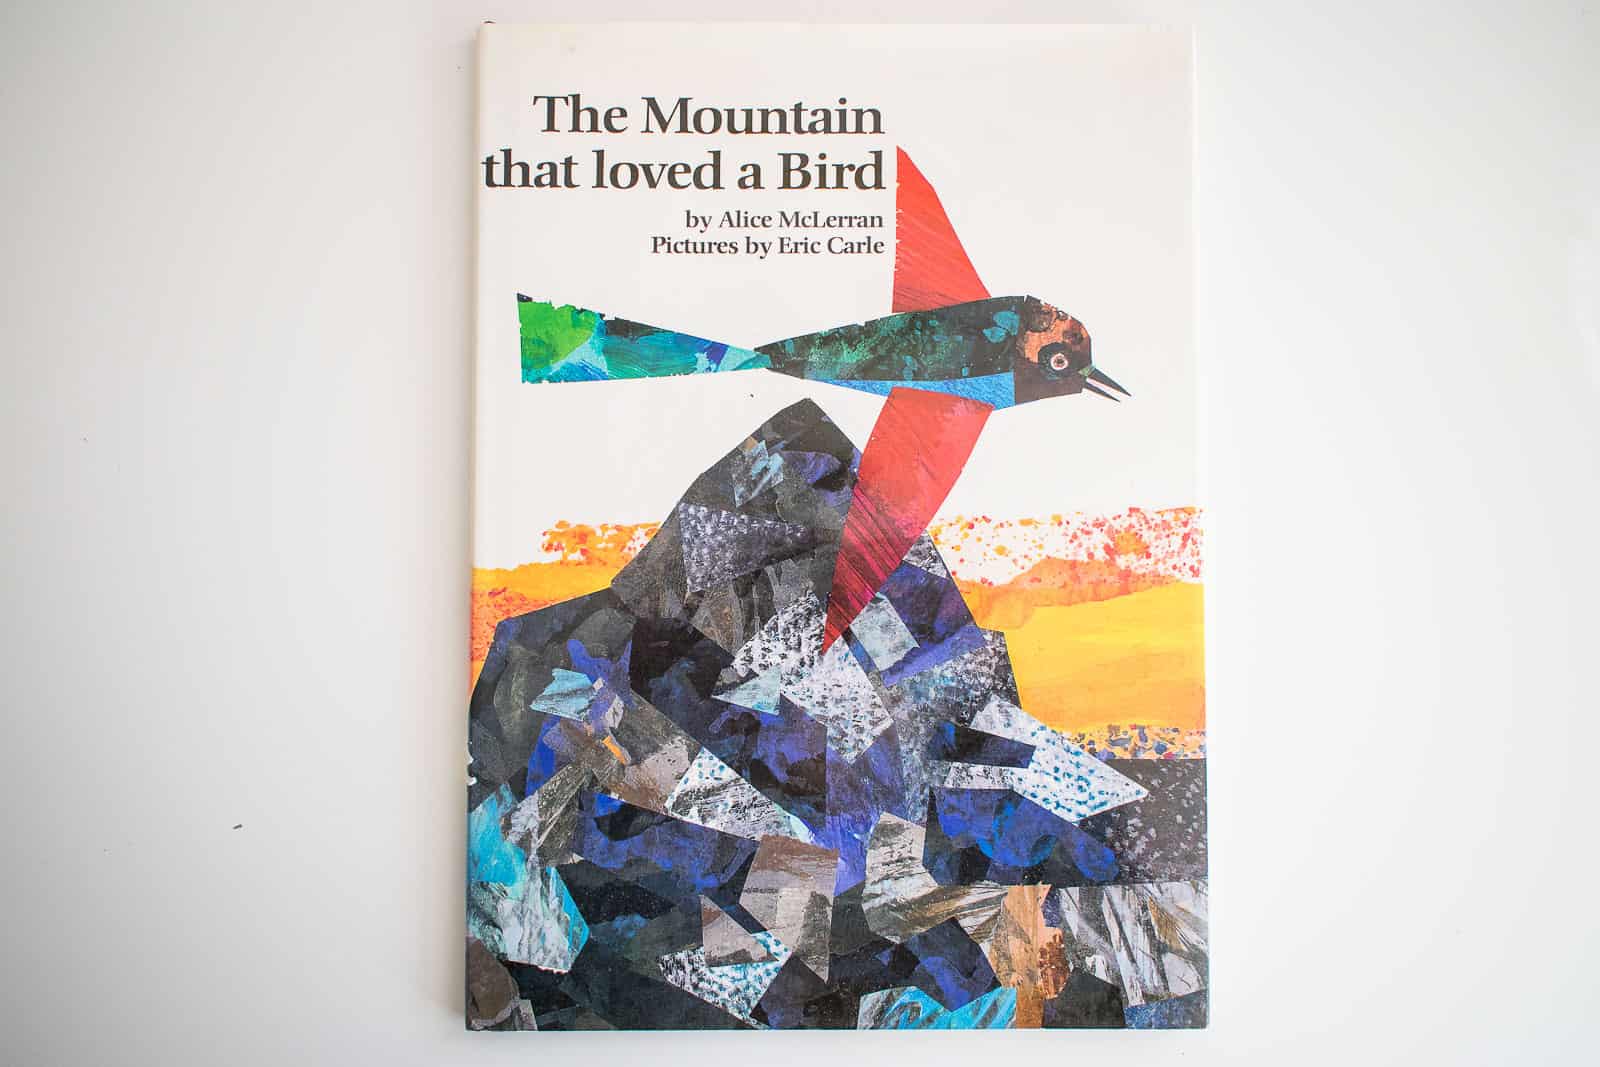 the Mountain that loved a bird